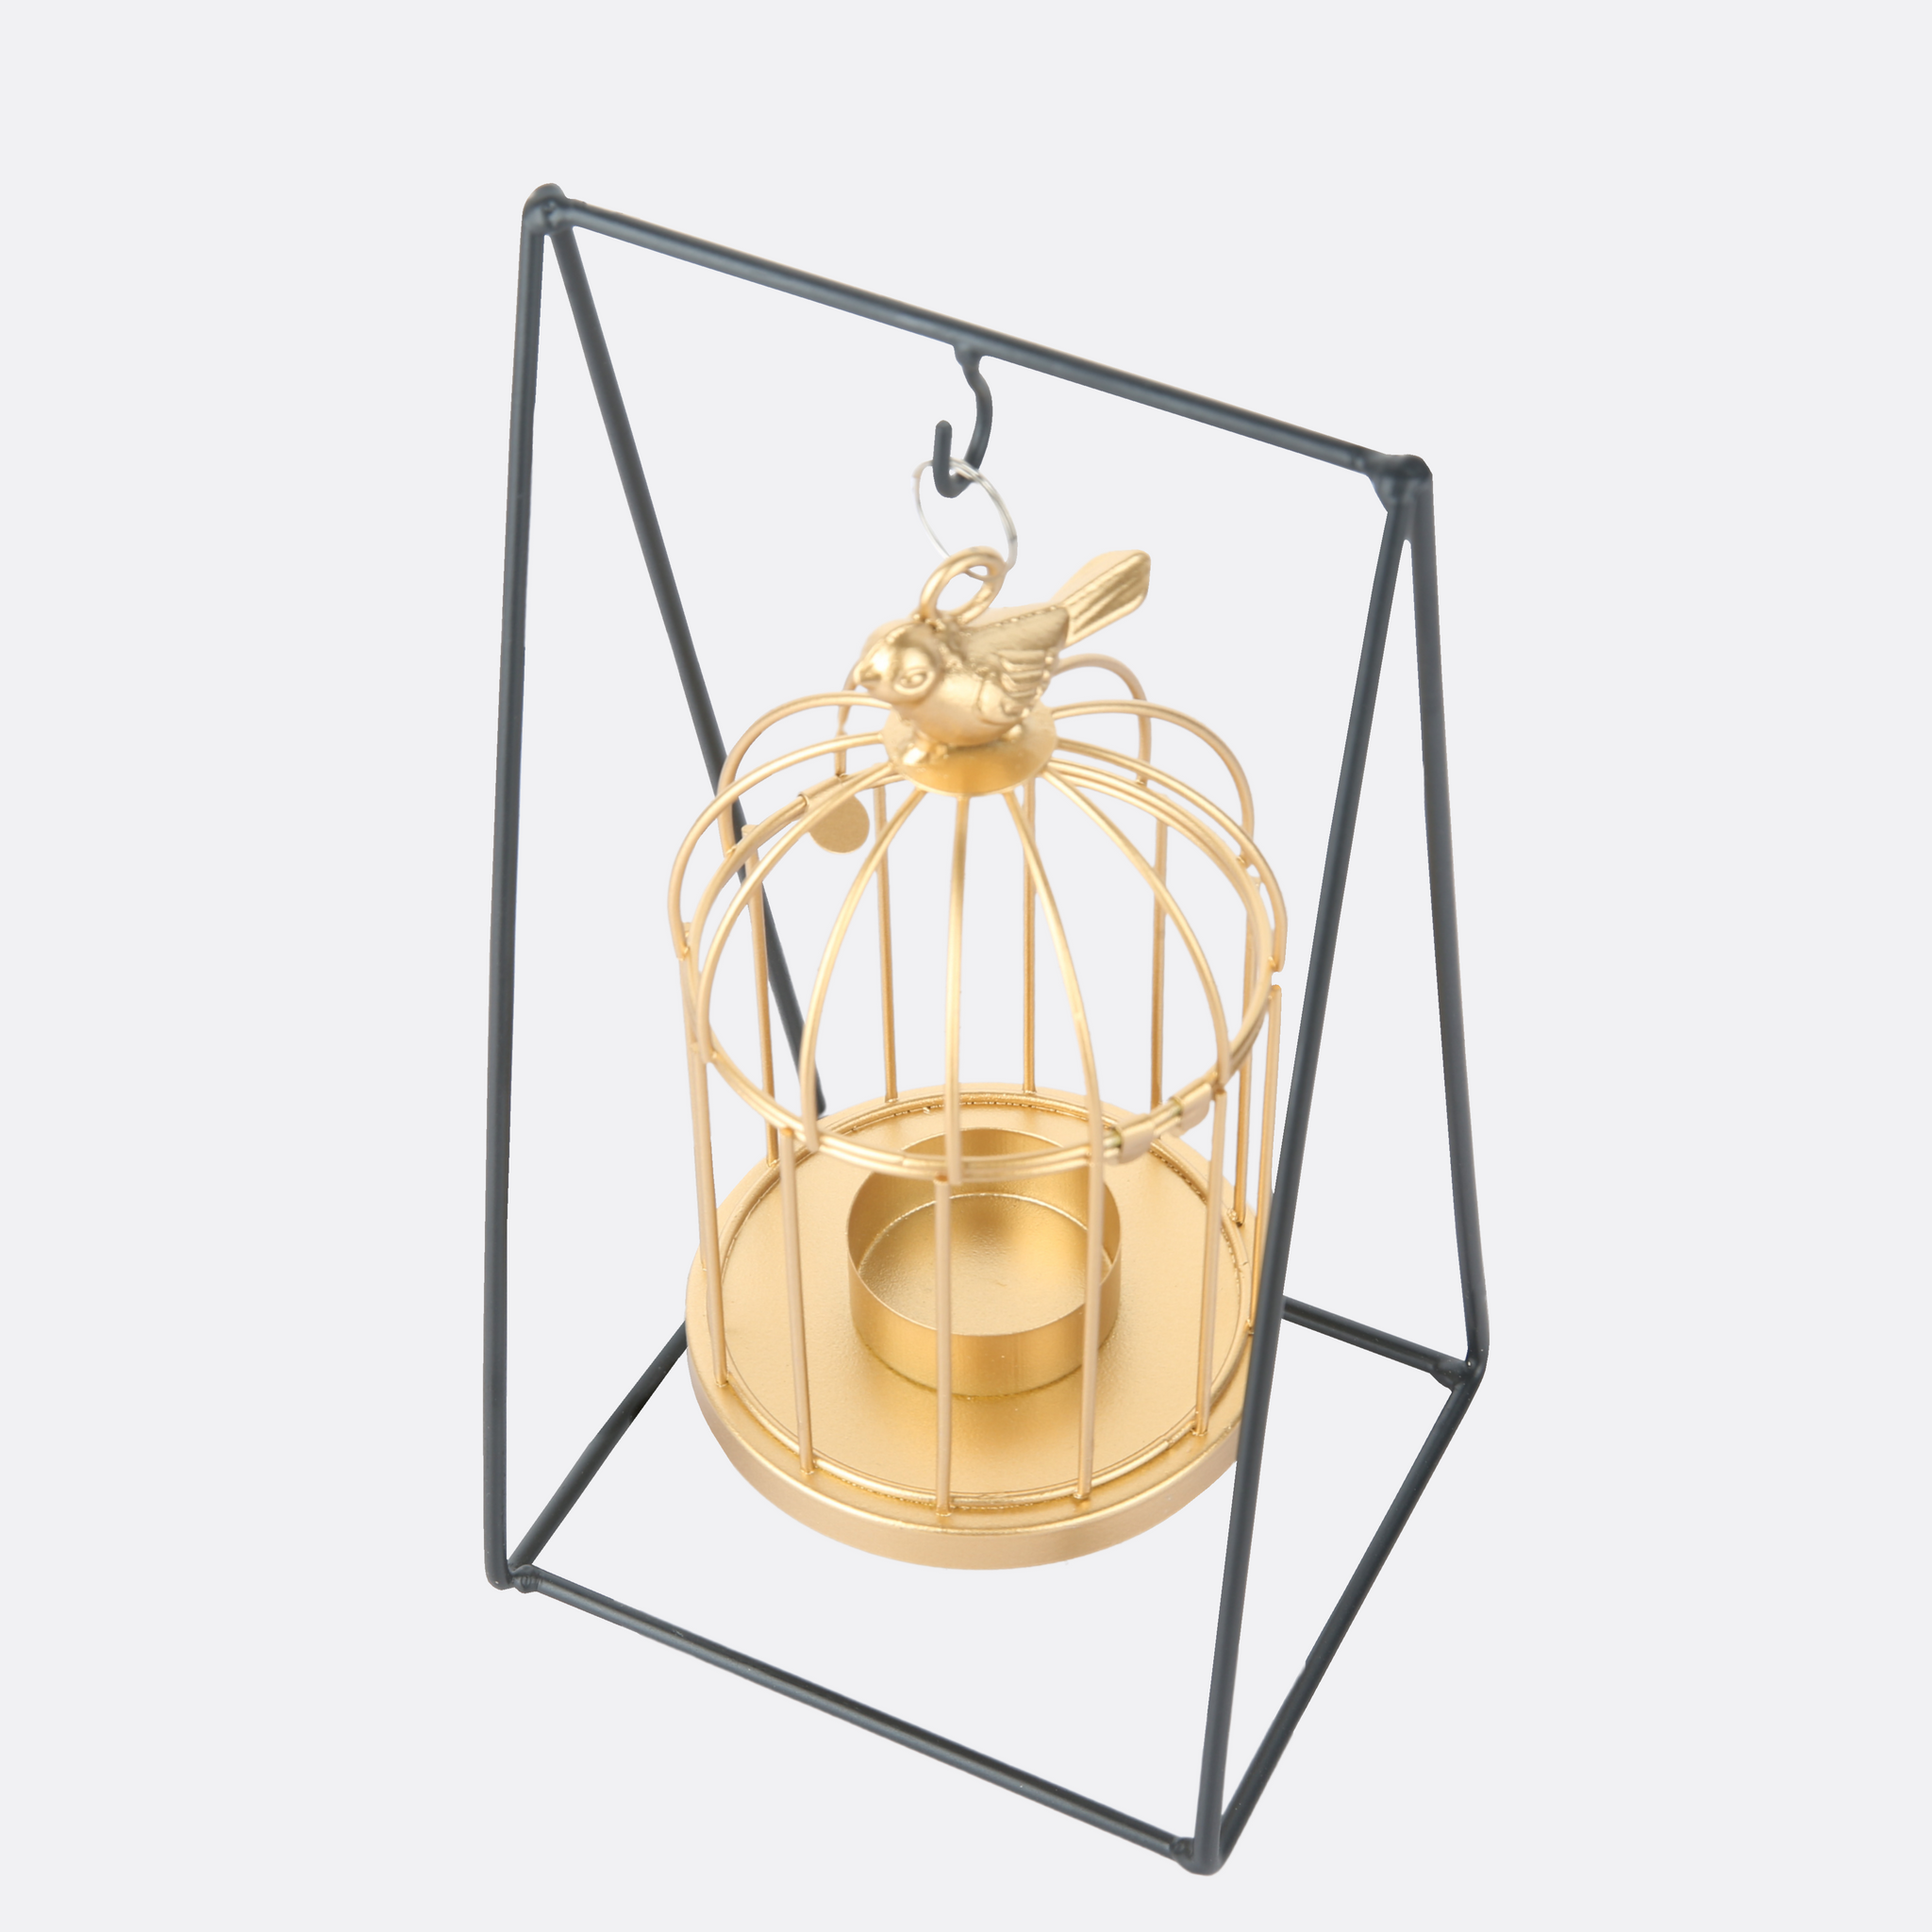 Metallic Cage Candle Holder